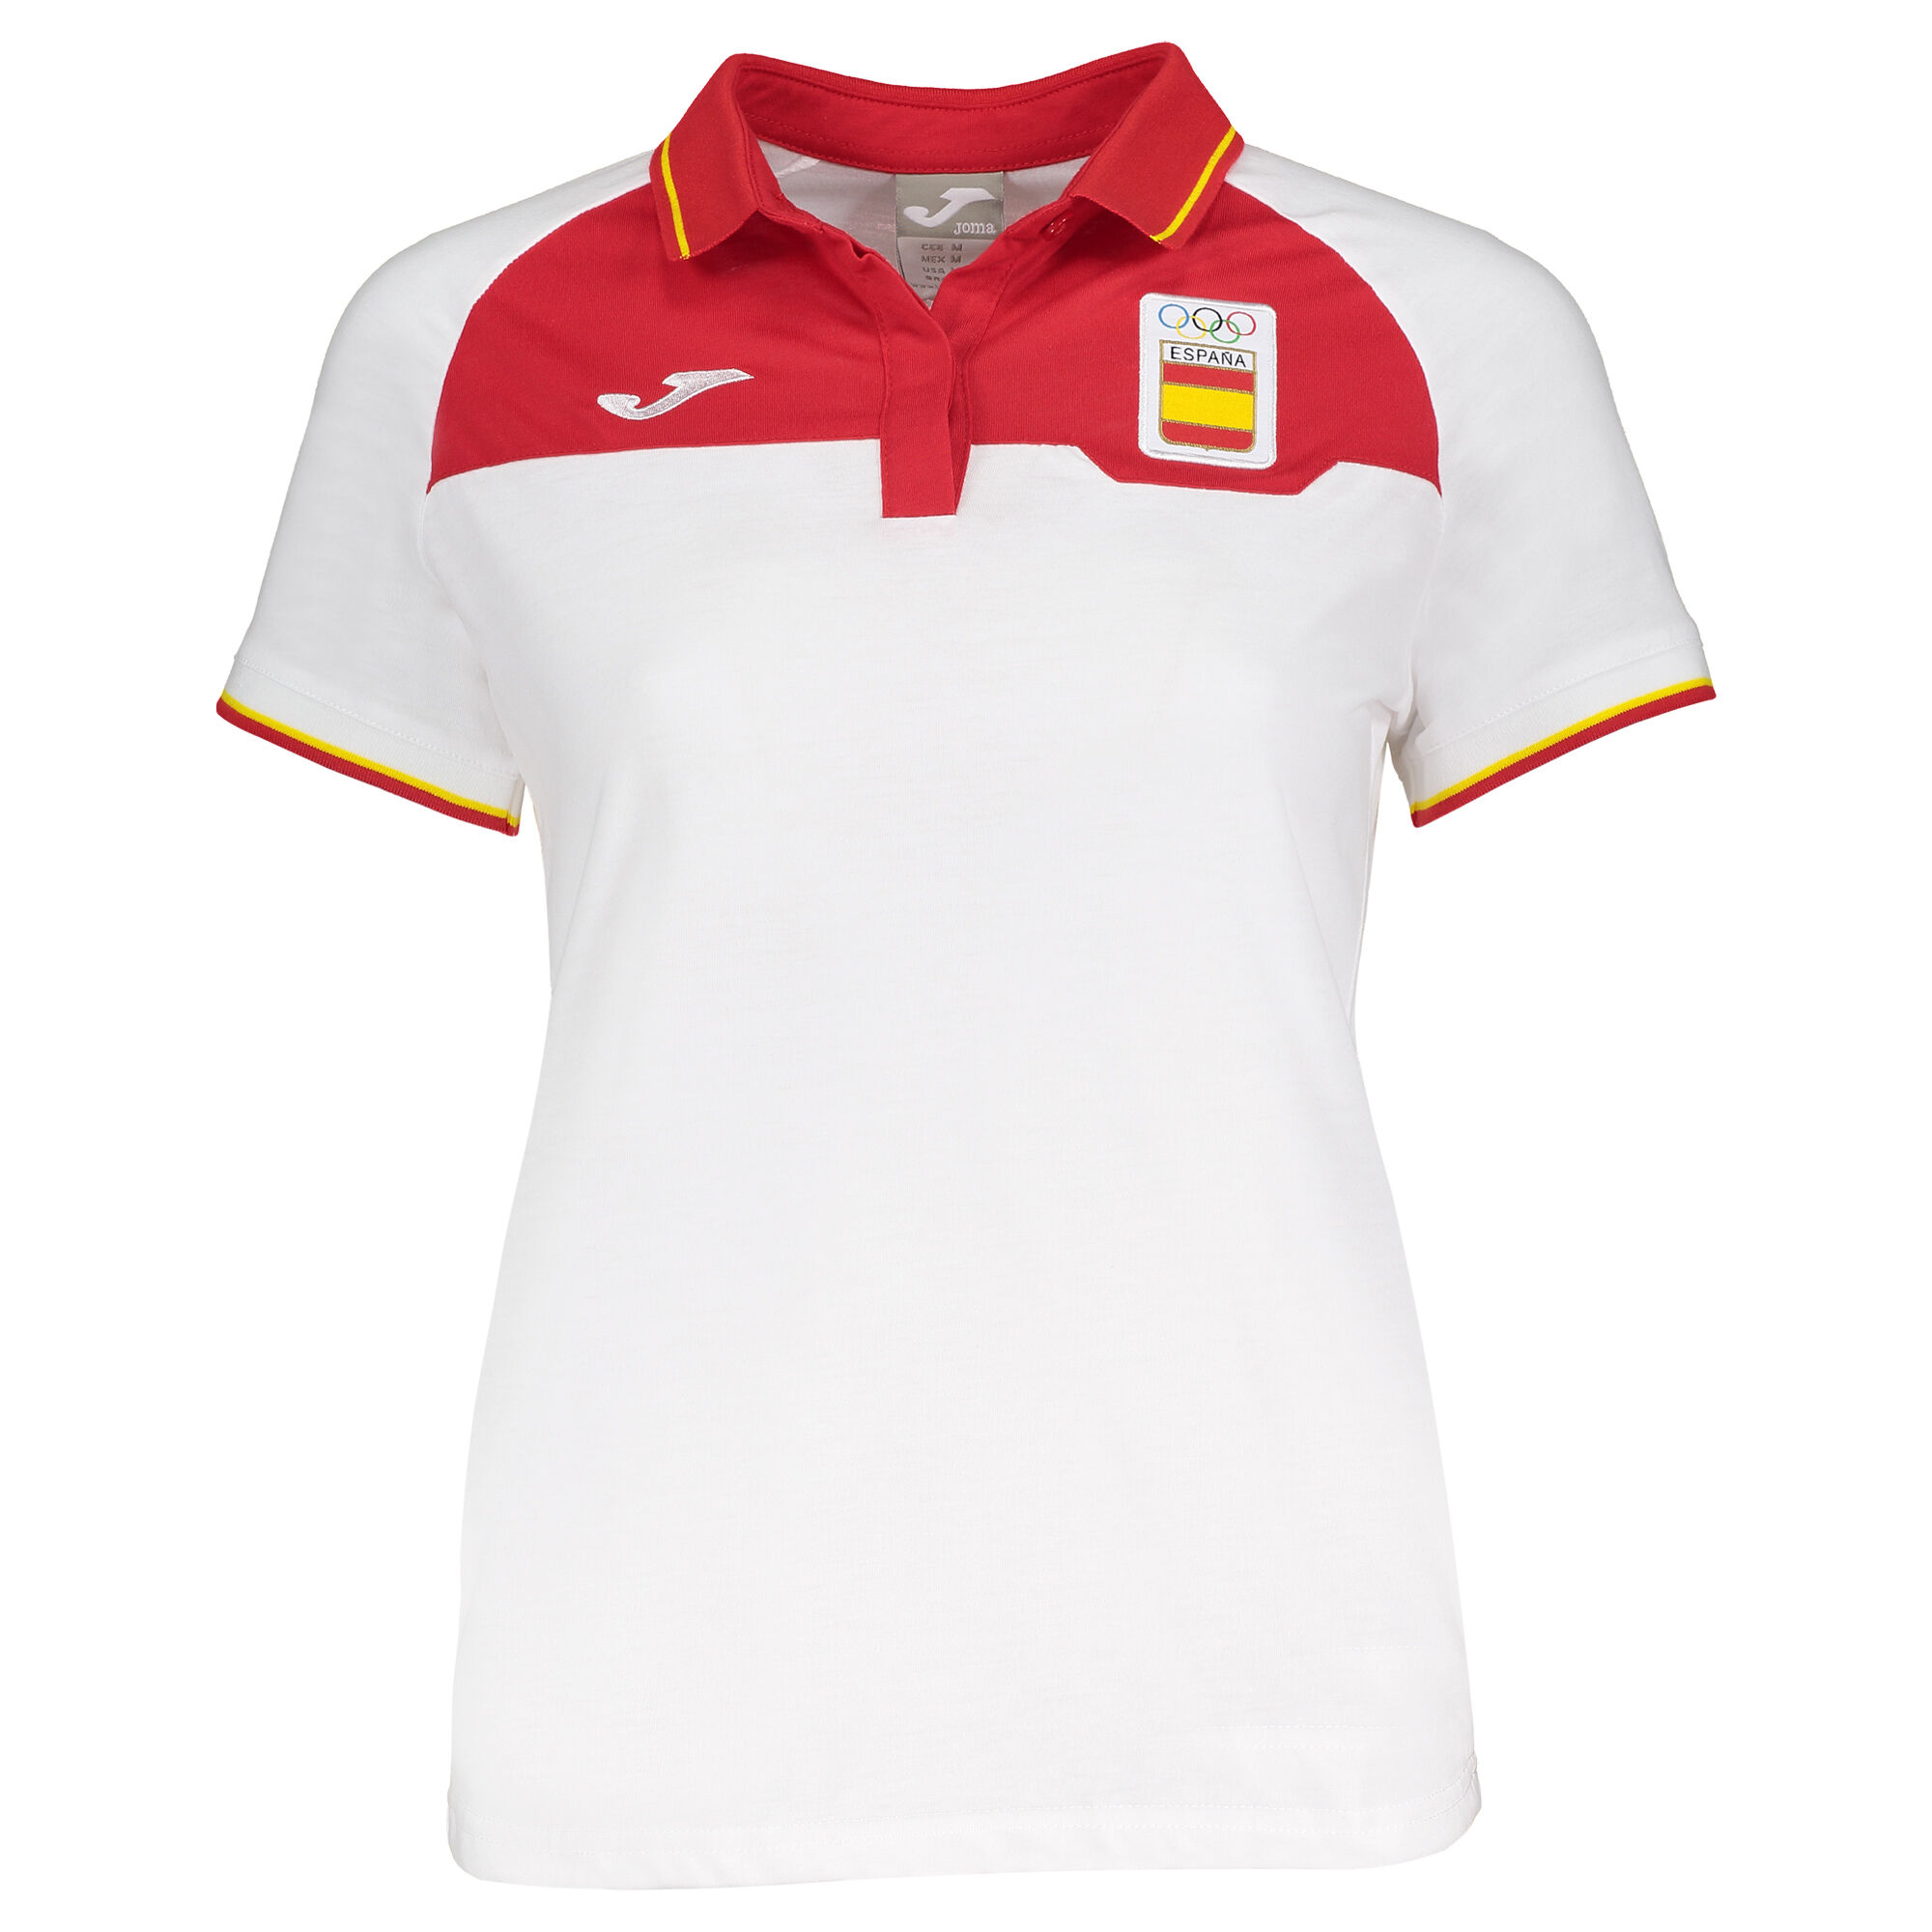 POLO SHIRT SHORT-SLEEVE LEISURE SPANISH OLYMPIC COMMITTEE WOMAN